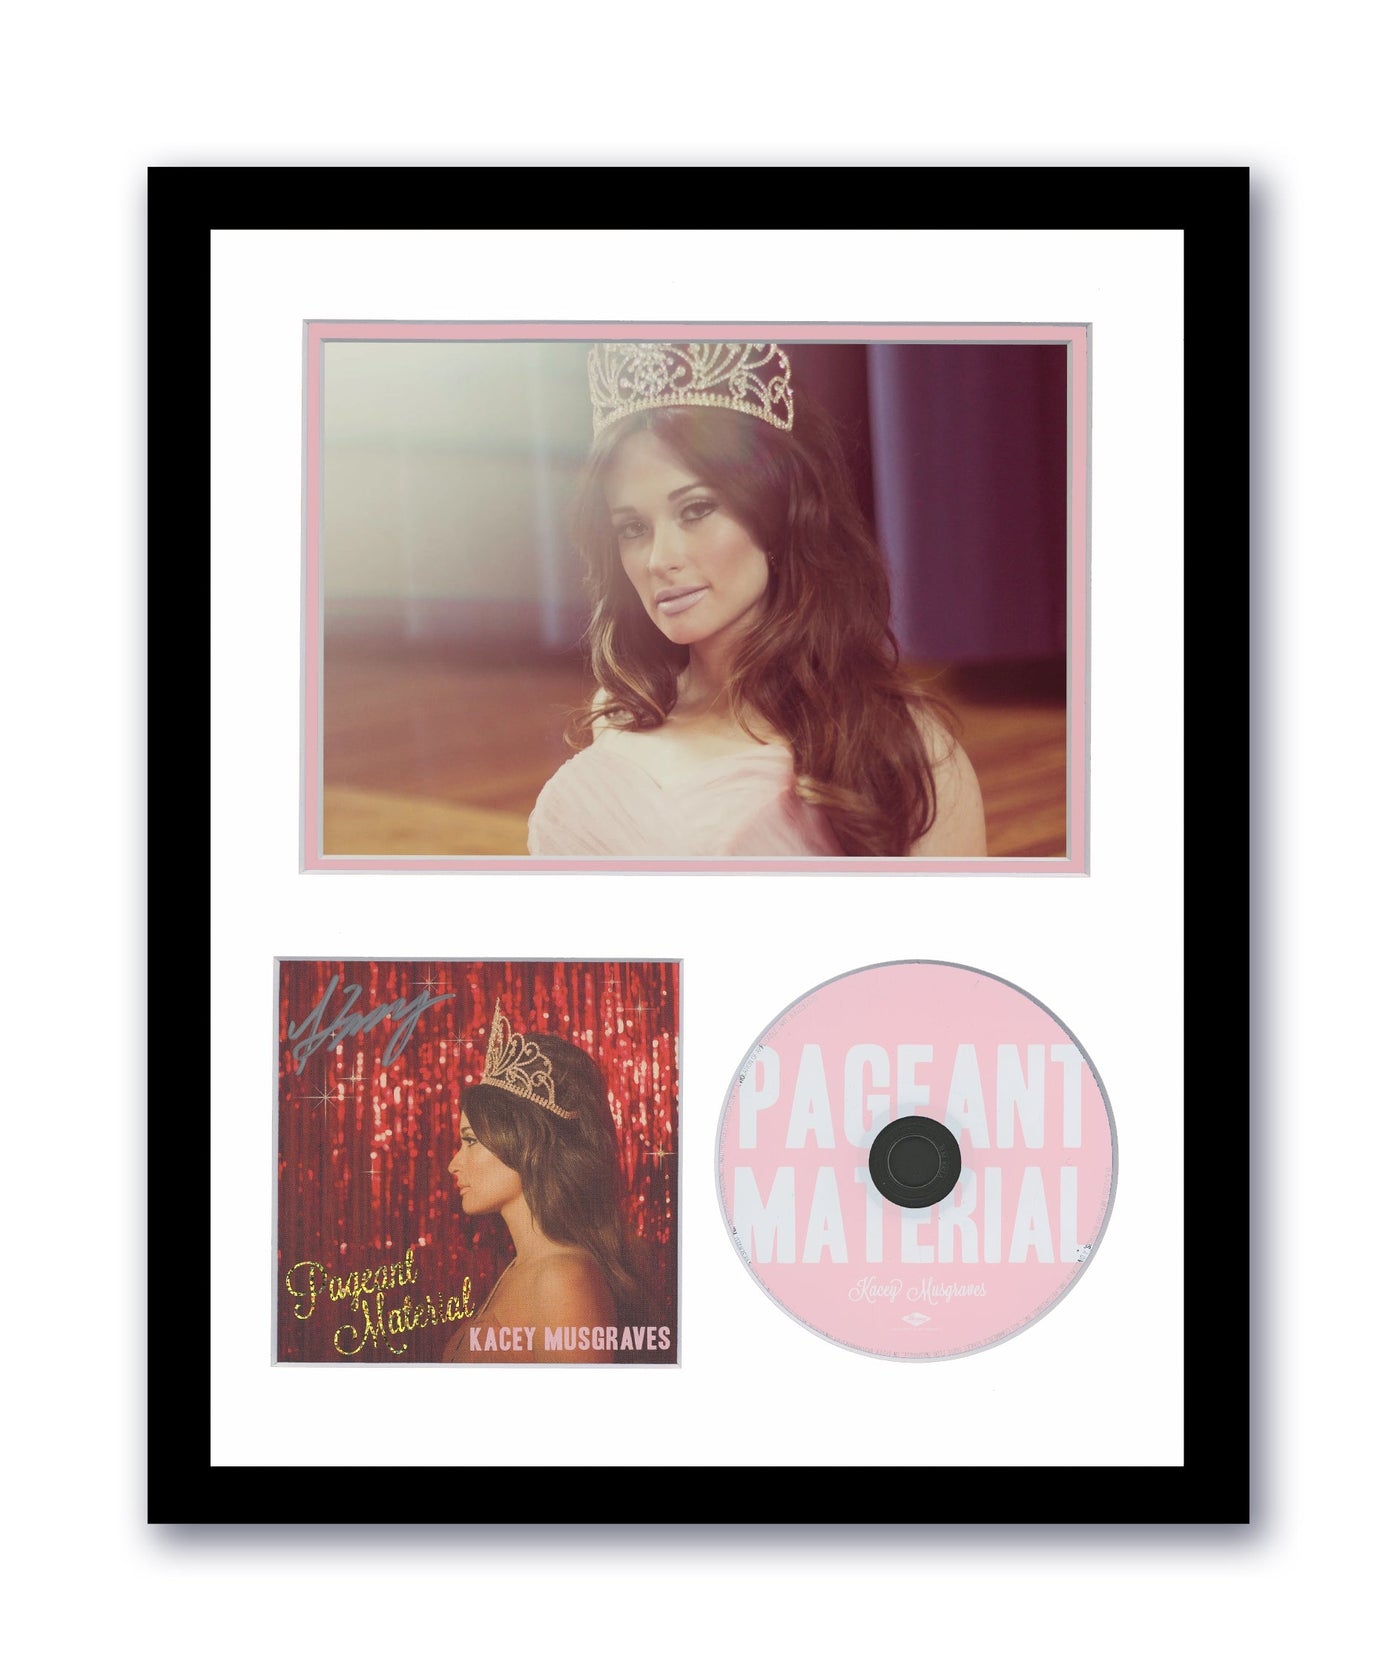 Kacey Musgraves Autographed Signed 11x14 Custom Framed CD Pageant Material ACOA